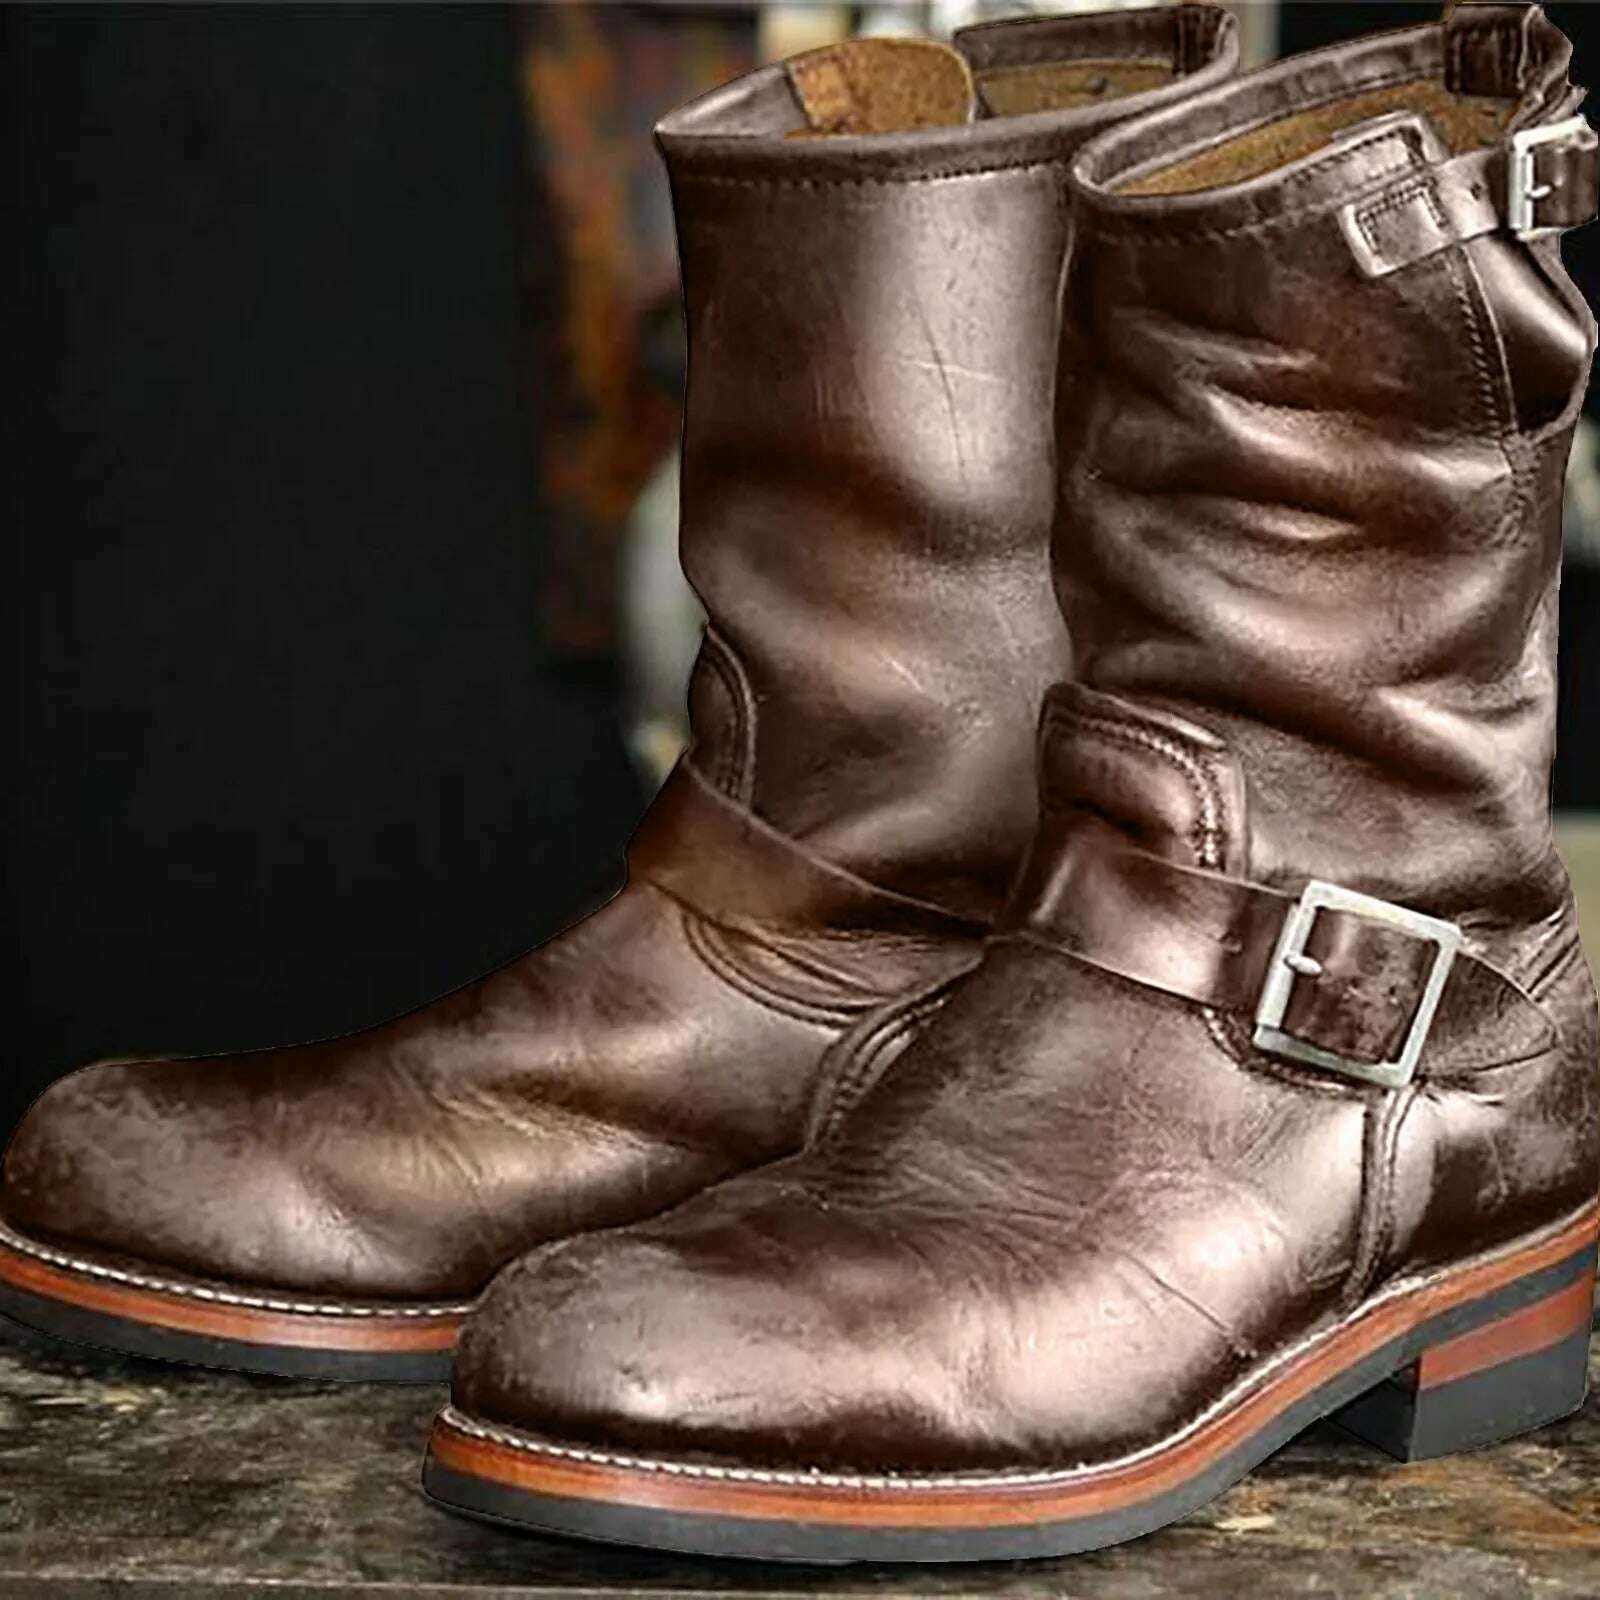 KIMLUD, Men's Vintage Cowboy Boots Leather High Top Chain Buckle Strap Punk Shoes Pointed Toe Biker Boots Men Botas Mujer, Coffee / 40 / United States, KIMLUD Women's Clothes